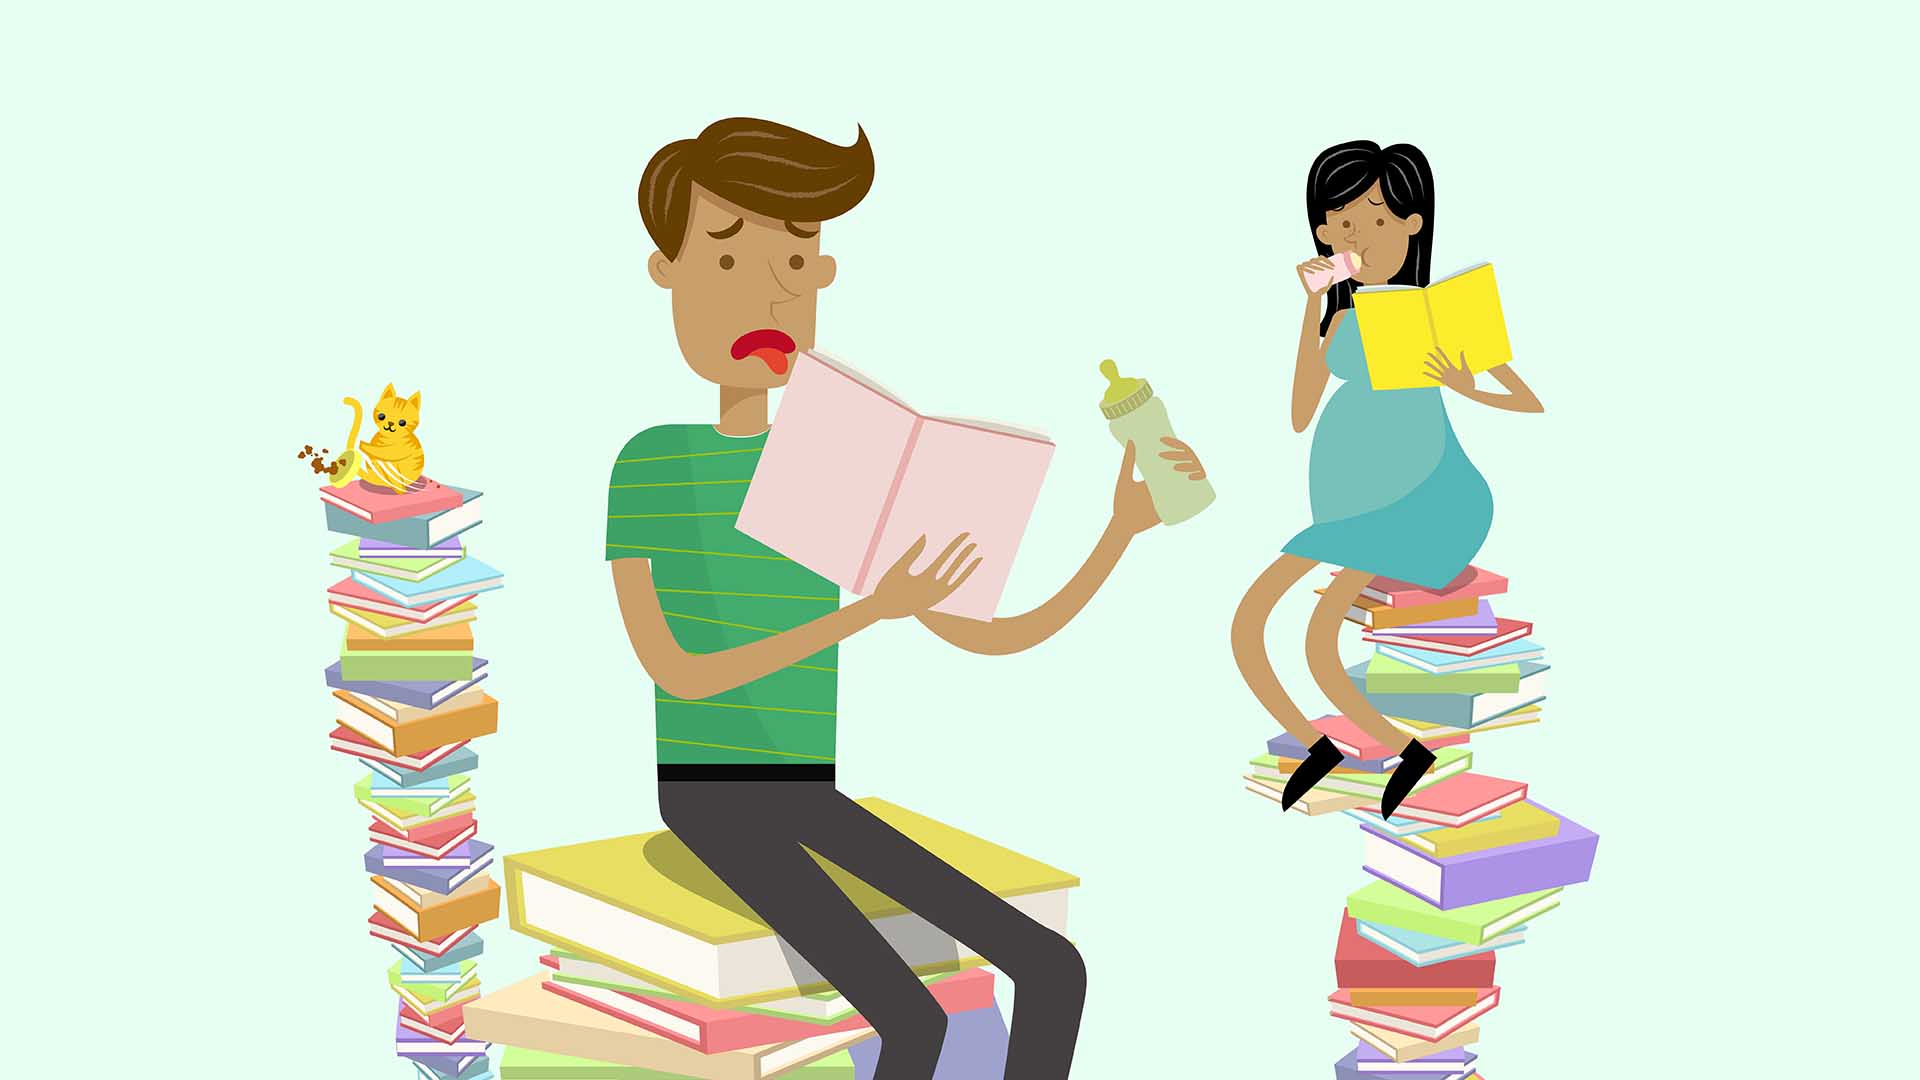 2D animated parents to be atop a pile of books.